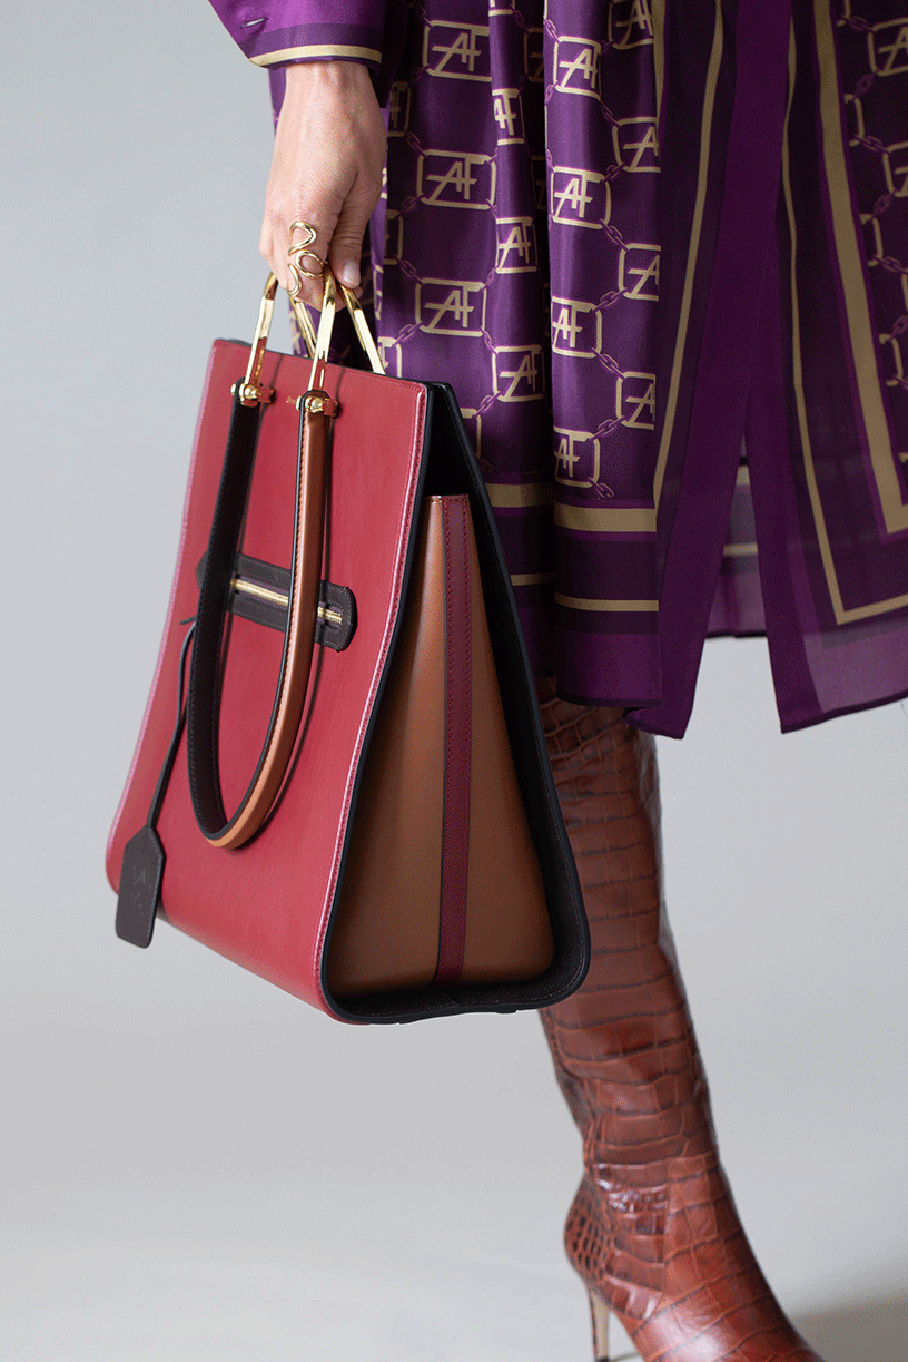 ALEXANDER MCQUEEN-The Tall Story Tote-WINE MULTI